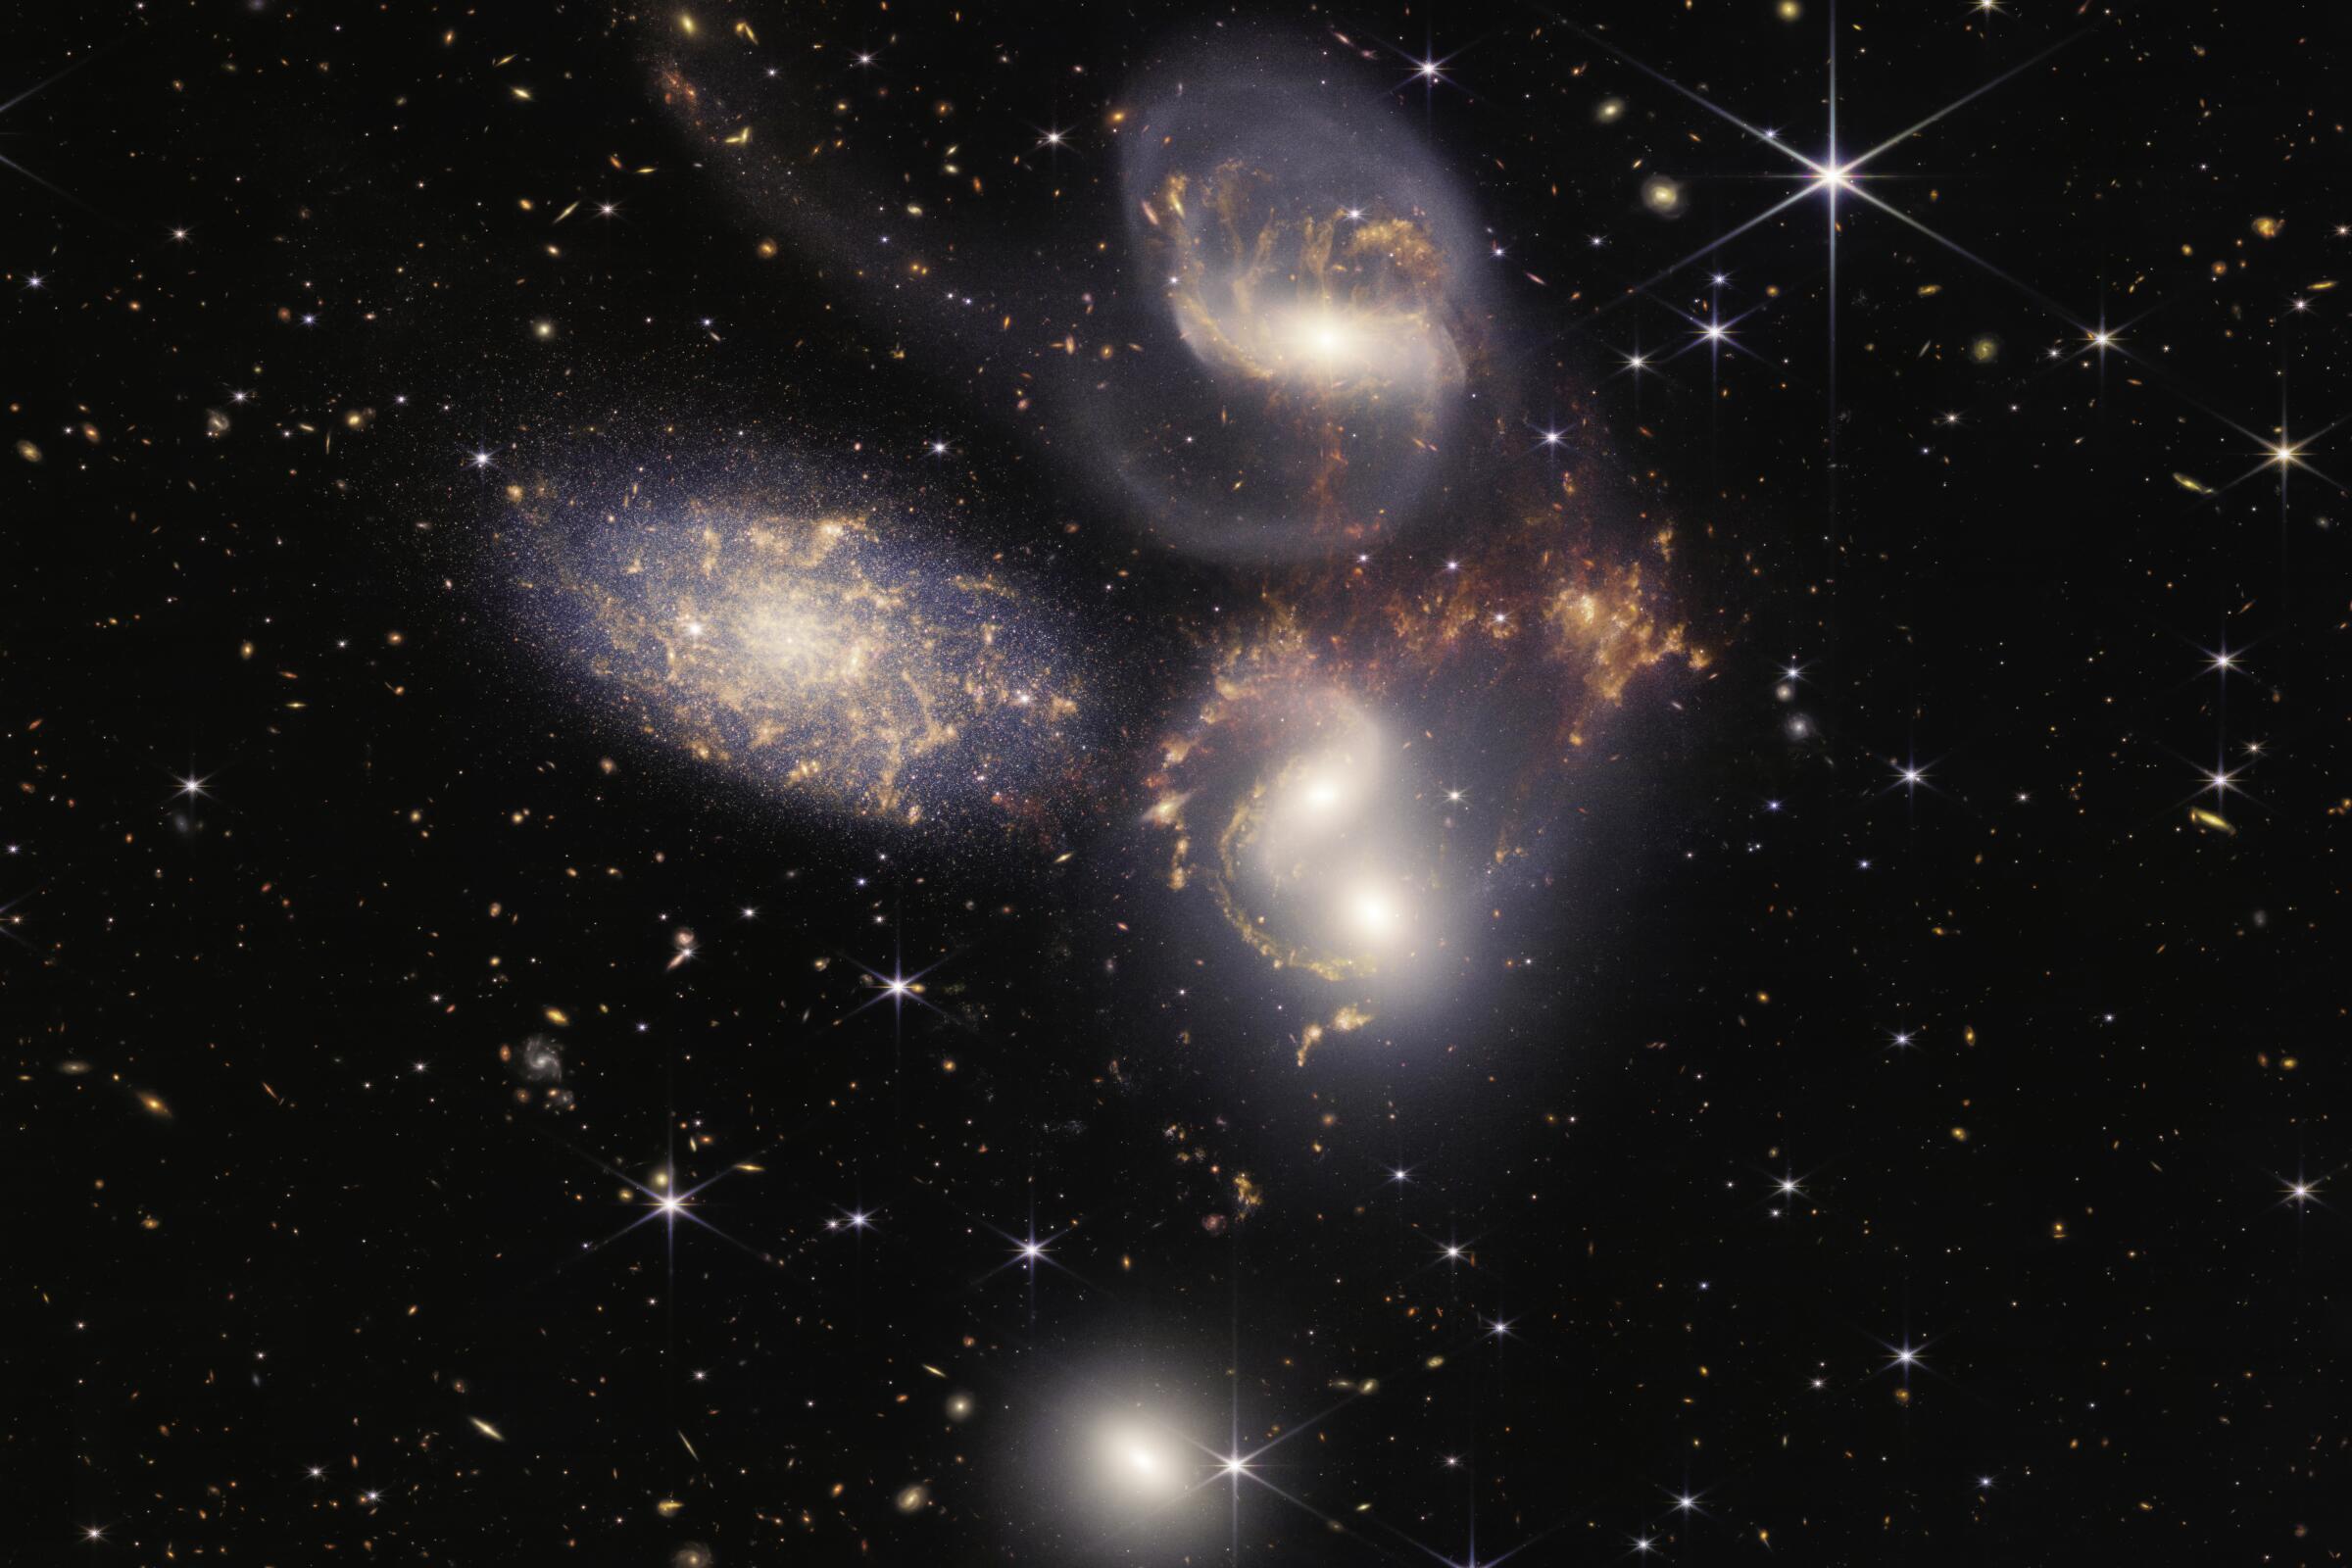 A cluster of galaxies